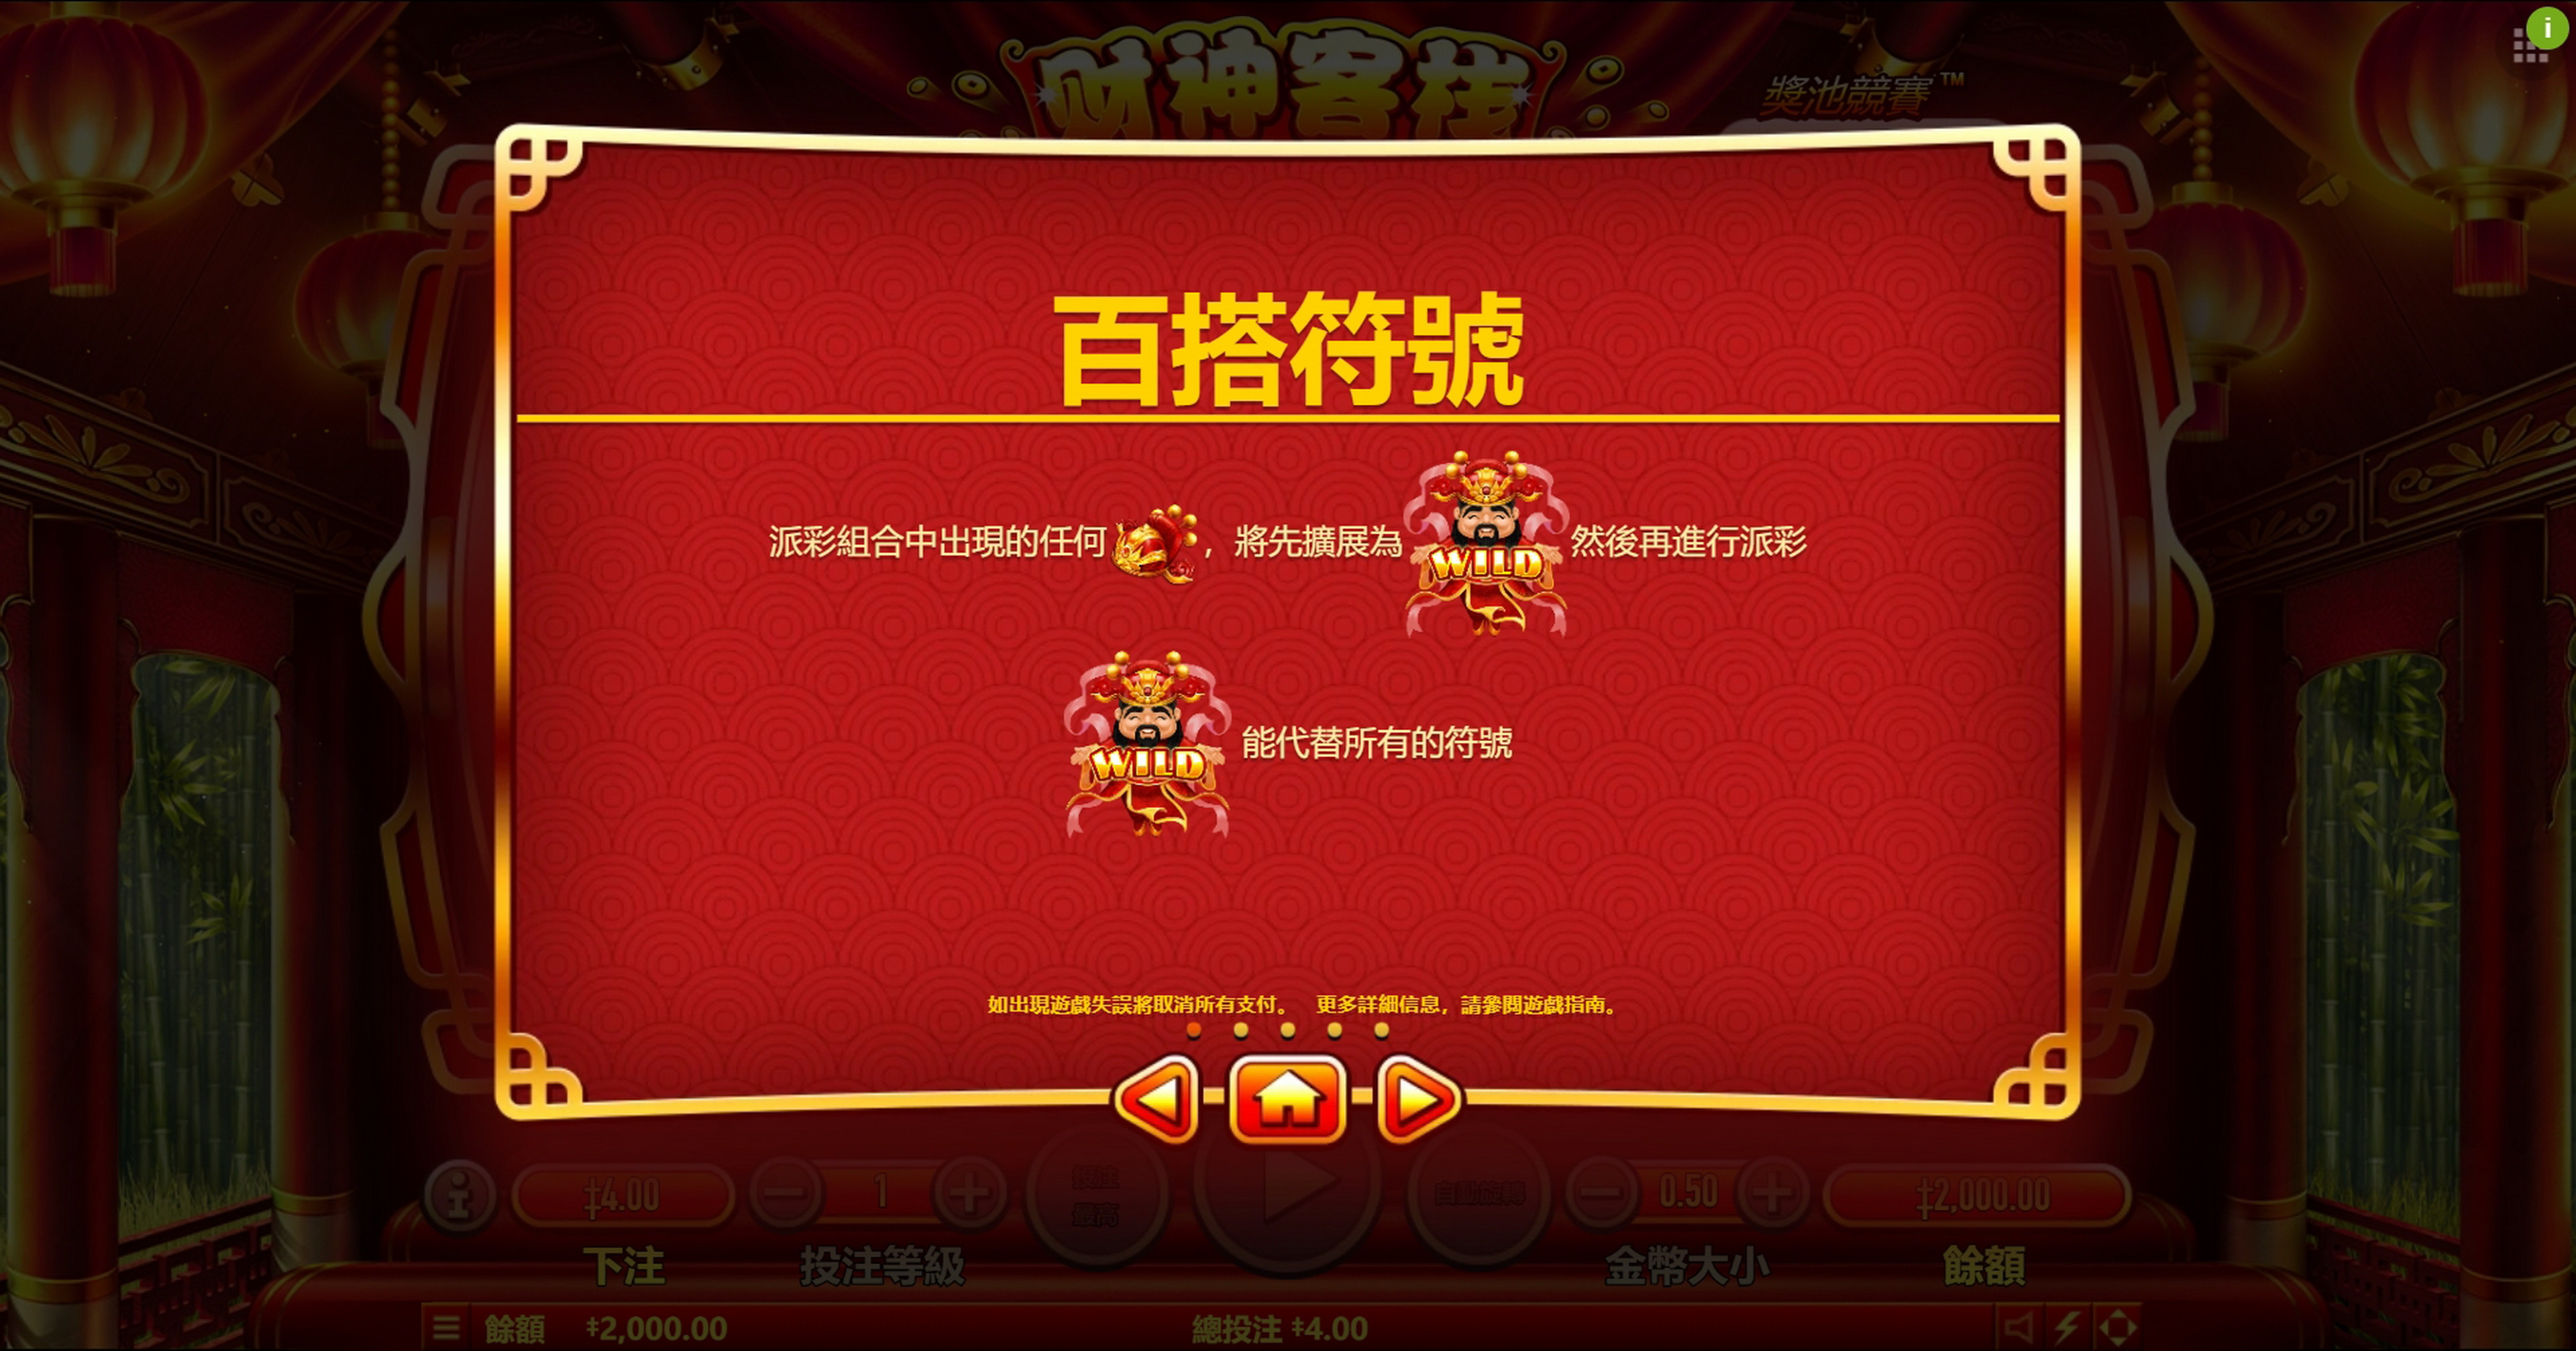 Info of Wealth Inn Slot Game by Habanero